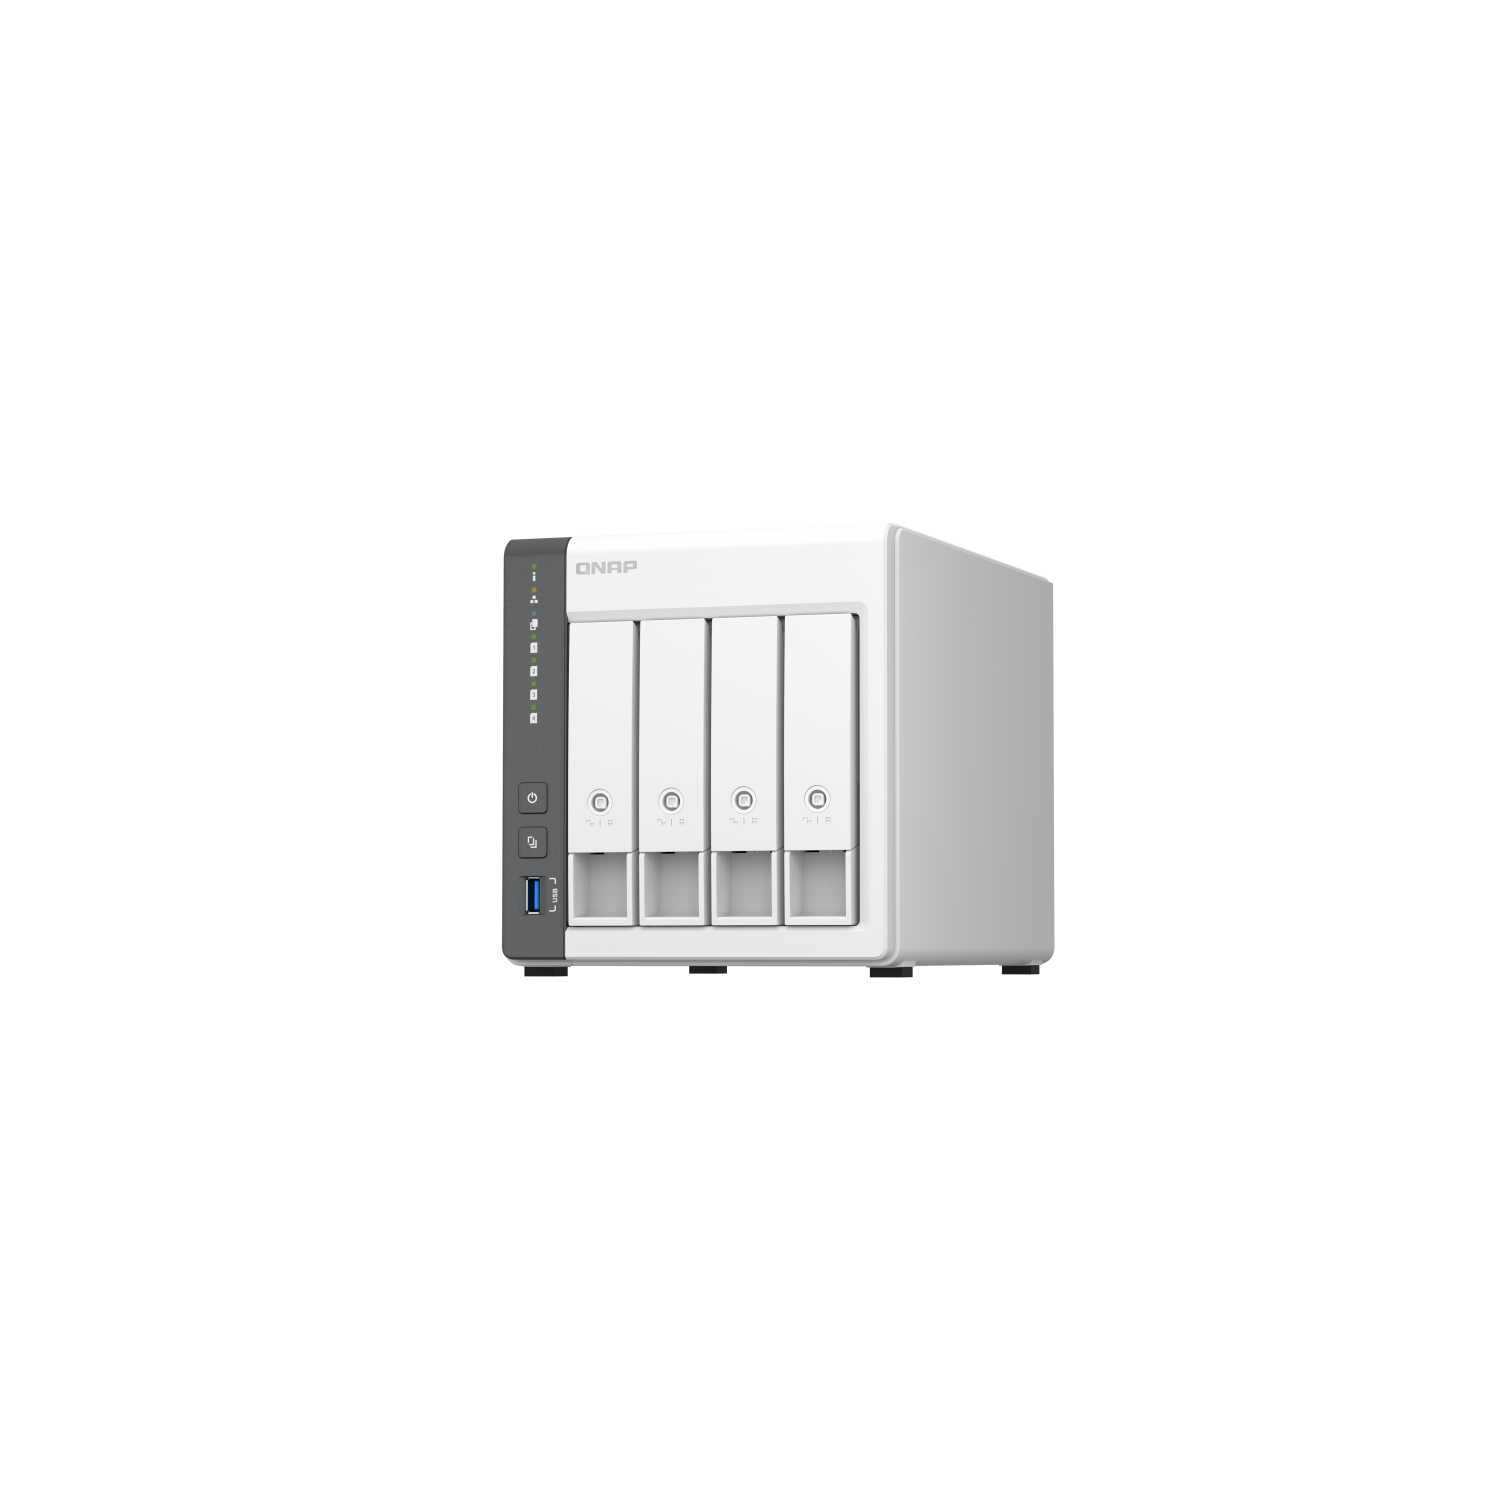 QNAP TS-433-4G-US 4 Bay NAS with Quad-core Processor, 4 GB DDR4 RAM and 2.5GbE Network (Diskless)